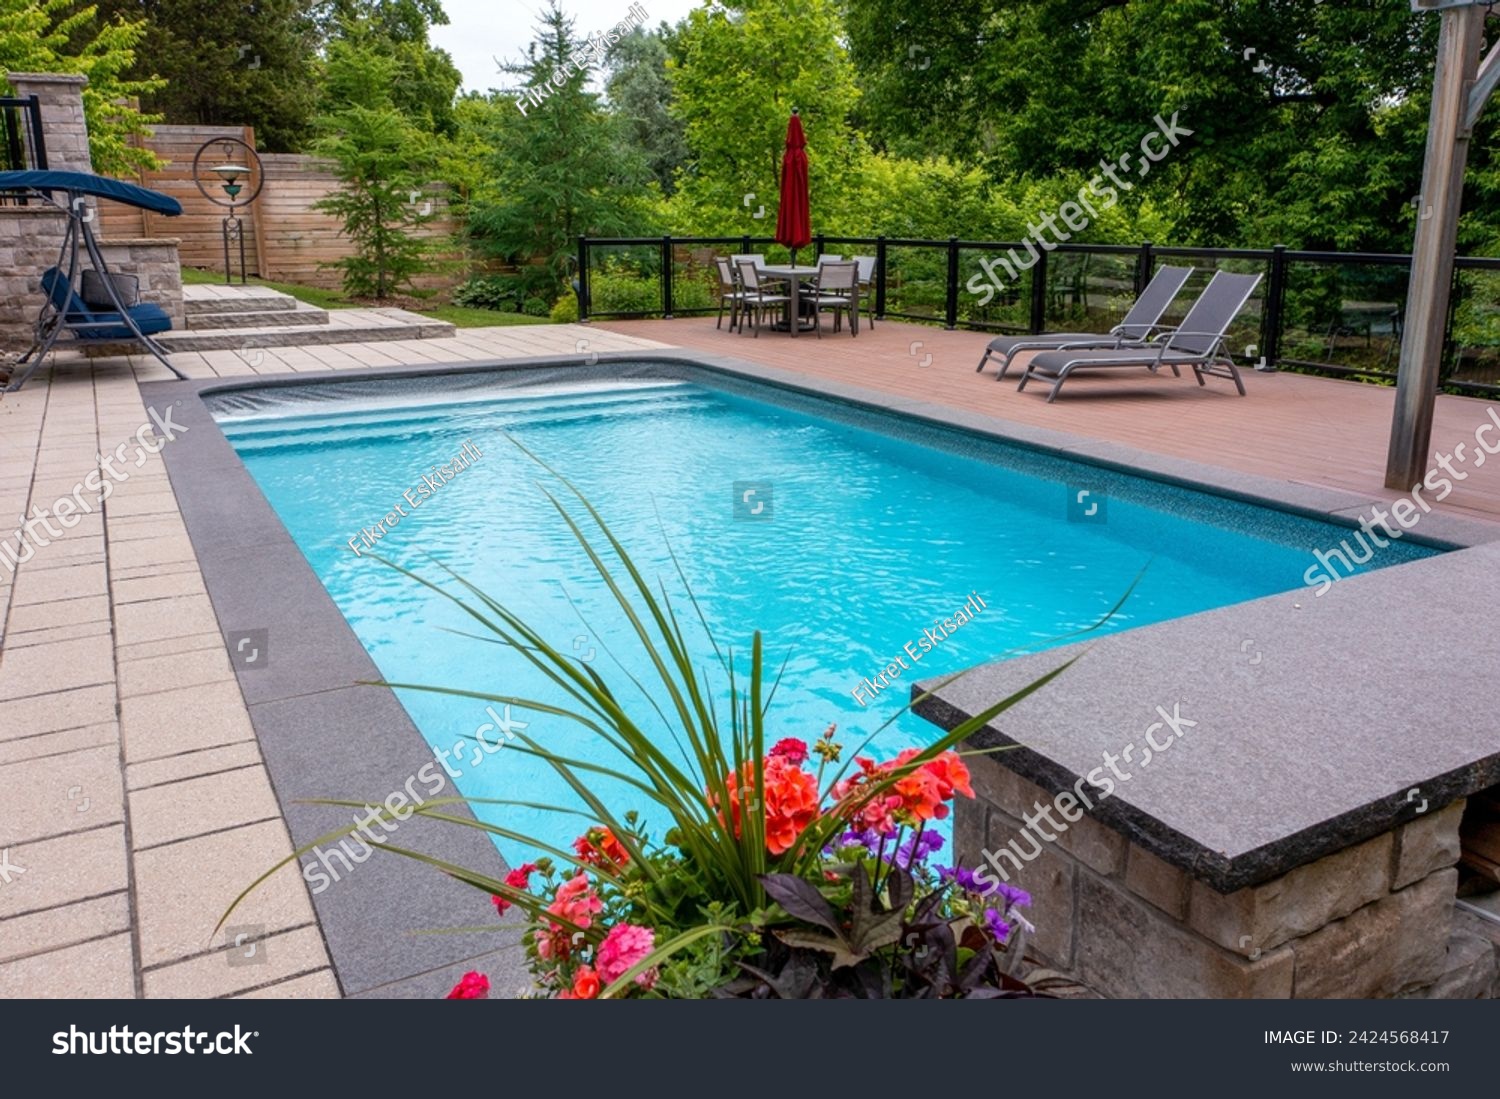 Dive into luxury with breathtaking backyard pool designs. Transform your outdoor space into a paradise with our stunning pool photography #2424568417